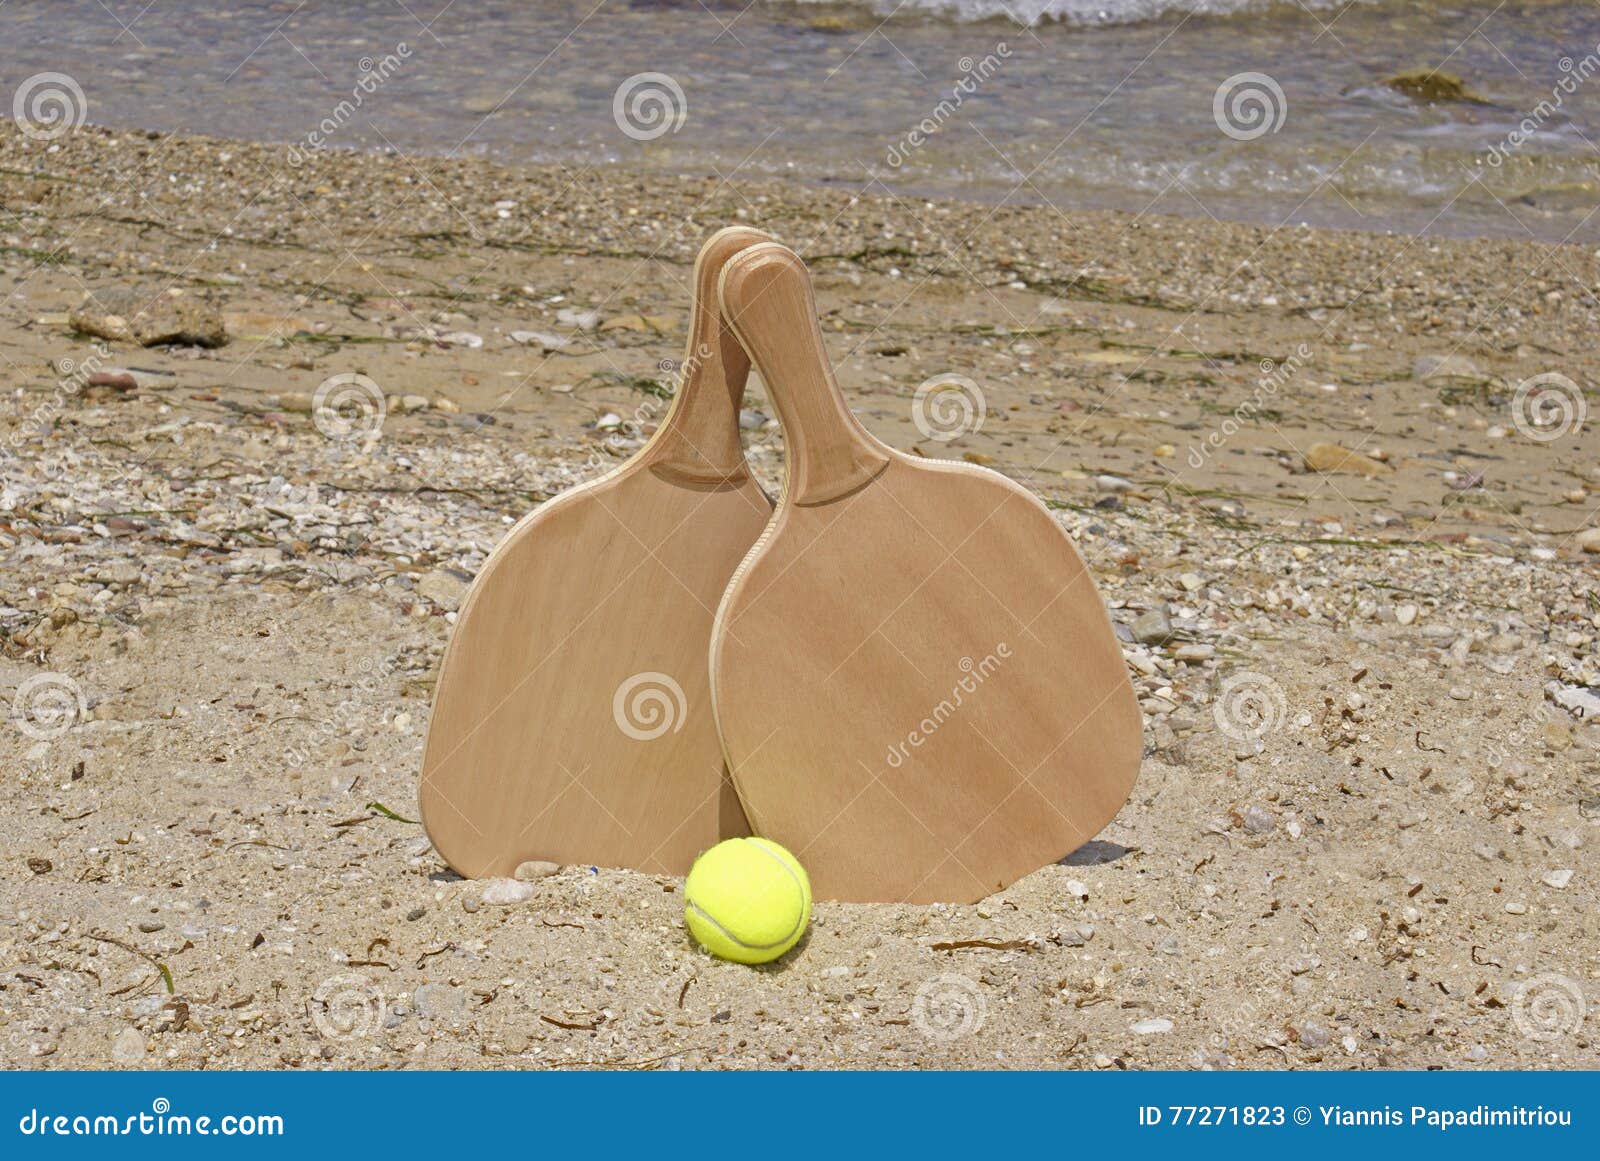 Set for a Game of Beach Tennis Stock Image - Image of clouds, strand ...